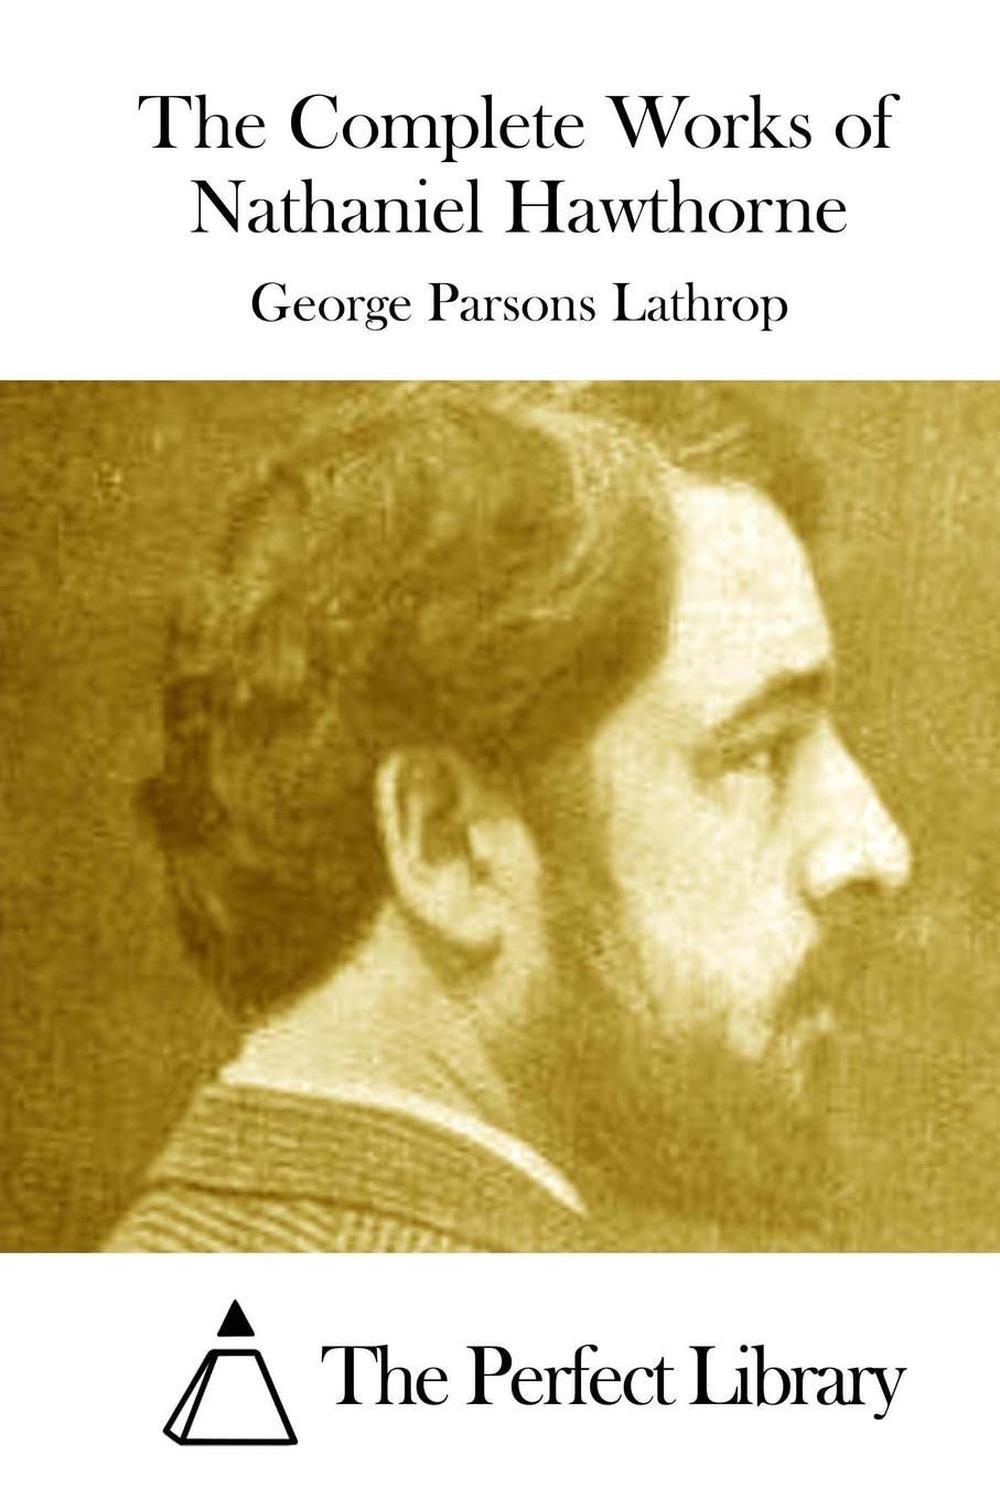 The Complete Works of Nathaniel Hawthorne by George Parsons Lathrop ...